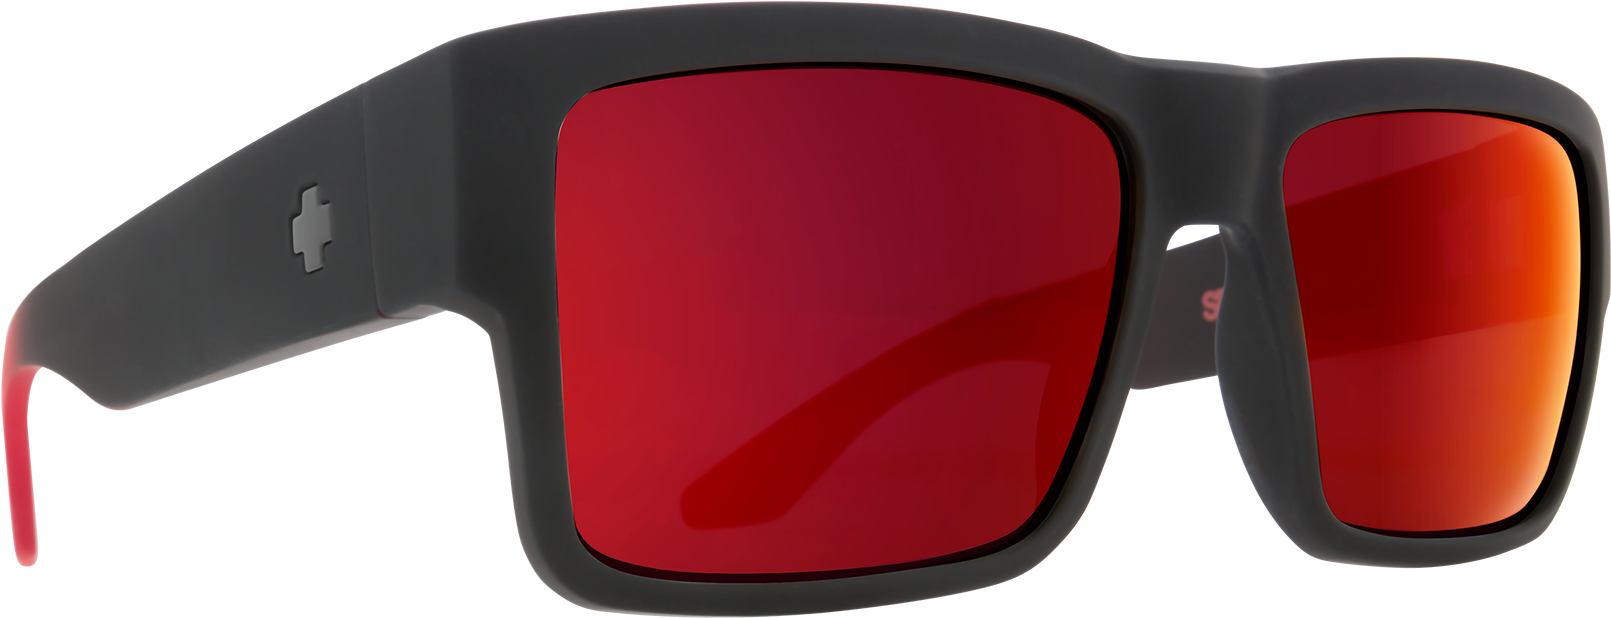 Stylish Black Sunglasseswith Red Lenses PNG